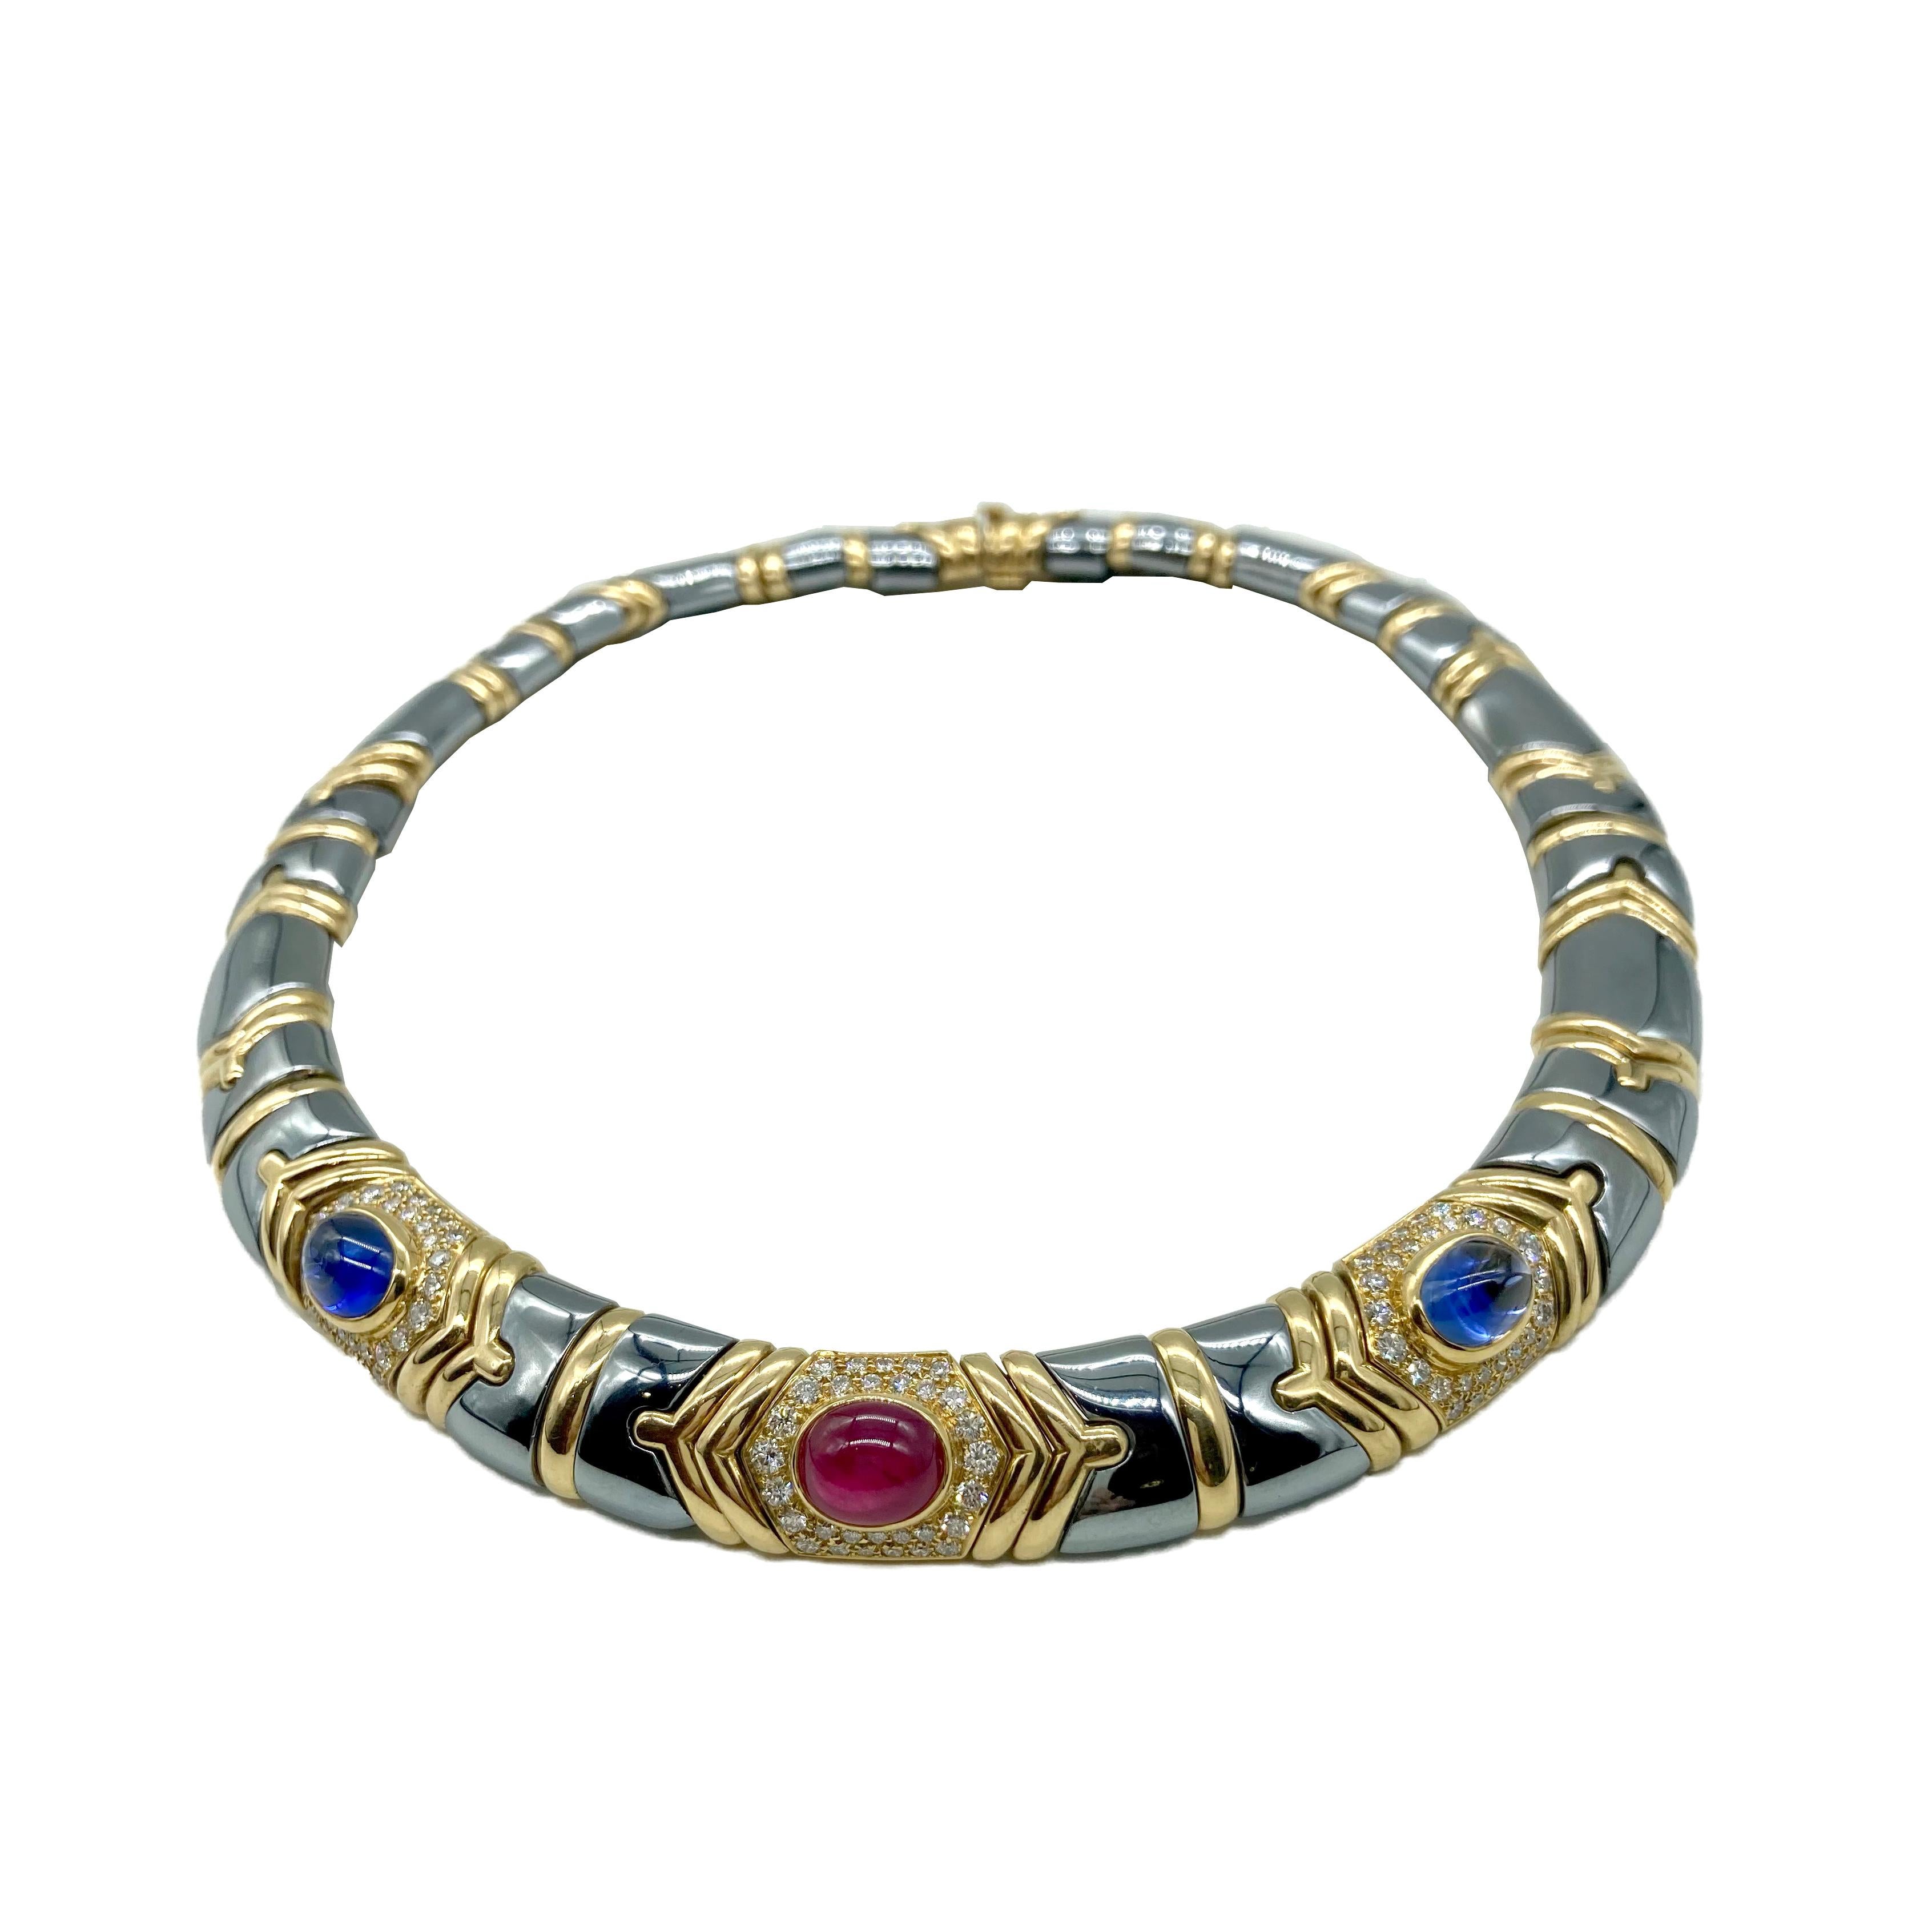 A chic Bulgari necklace in 18 karat yellow gold with hematite, diamonds, and cabochon ruby and sapphires. Made in Italy, circa 1985.